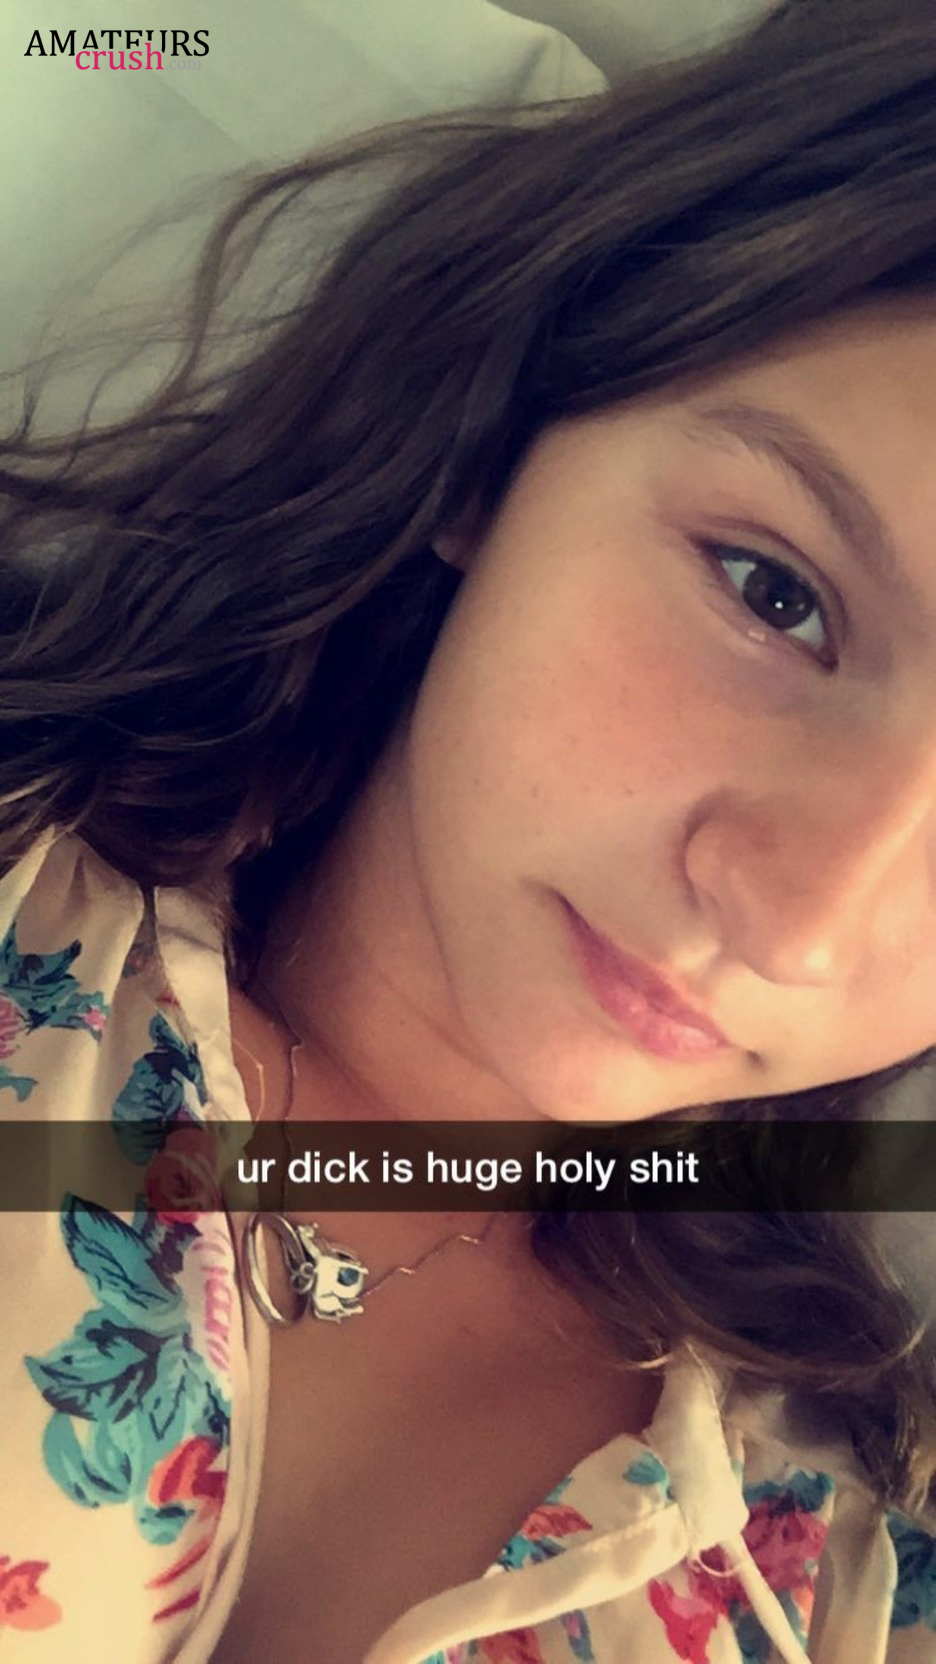 Ladygirl reccomend college girl snapchats herself sucking